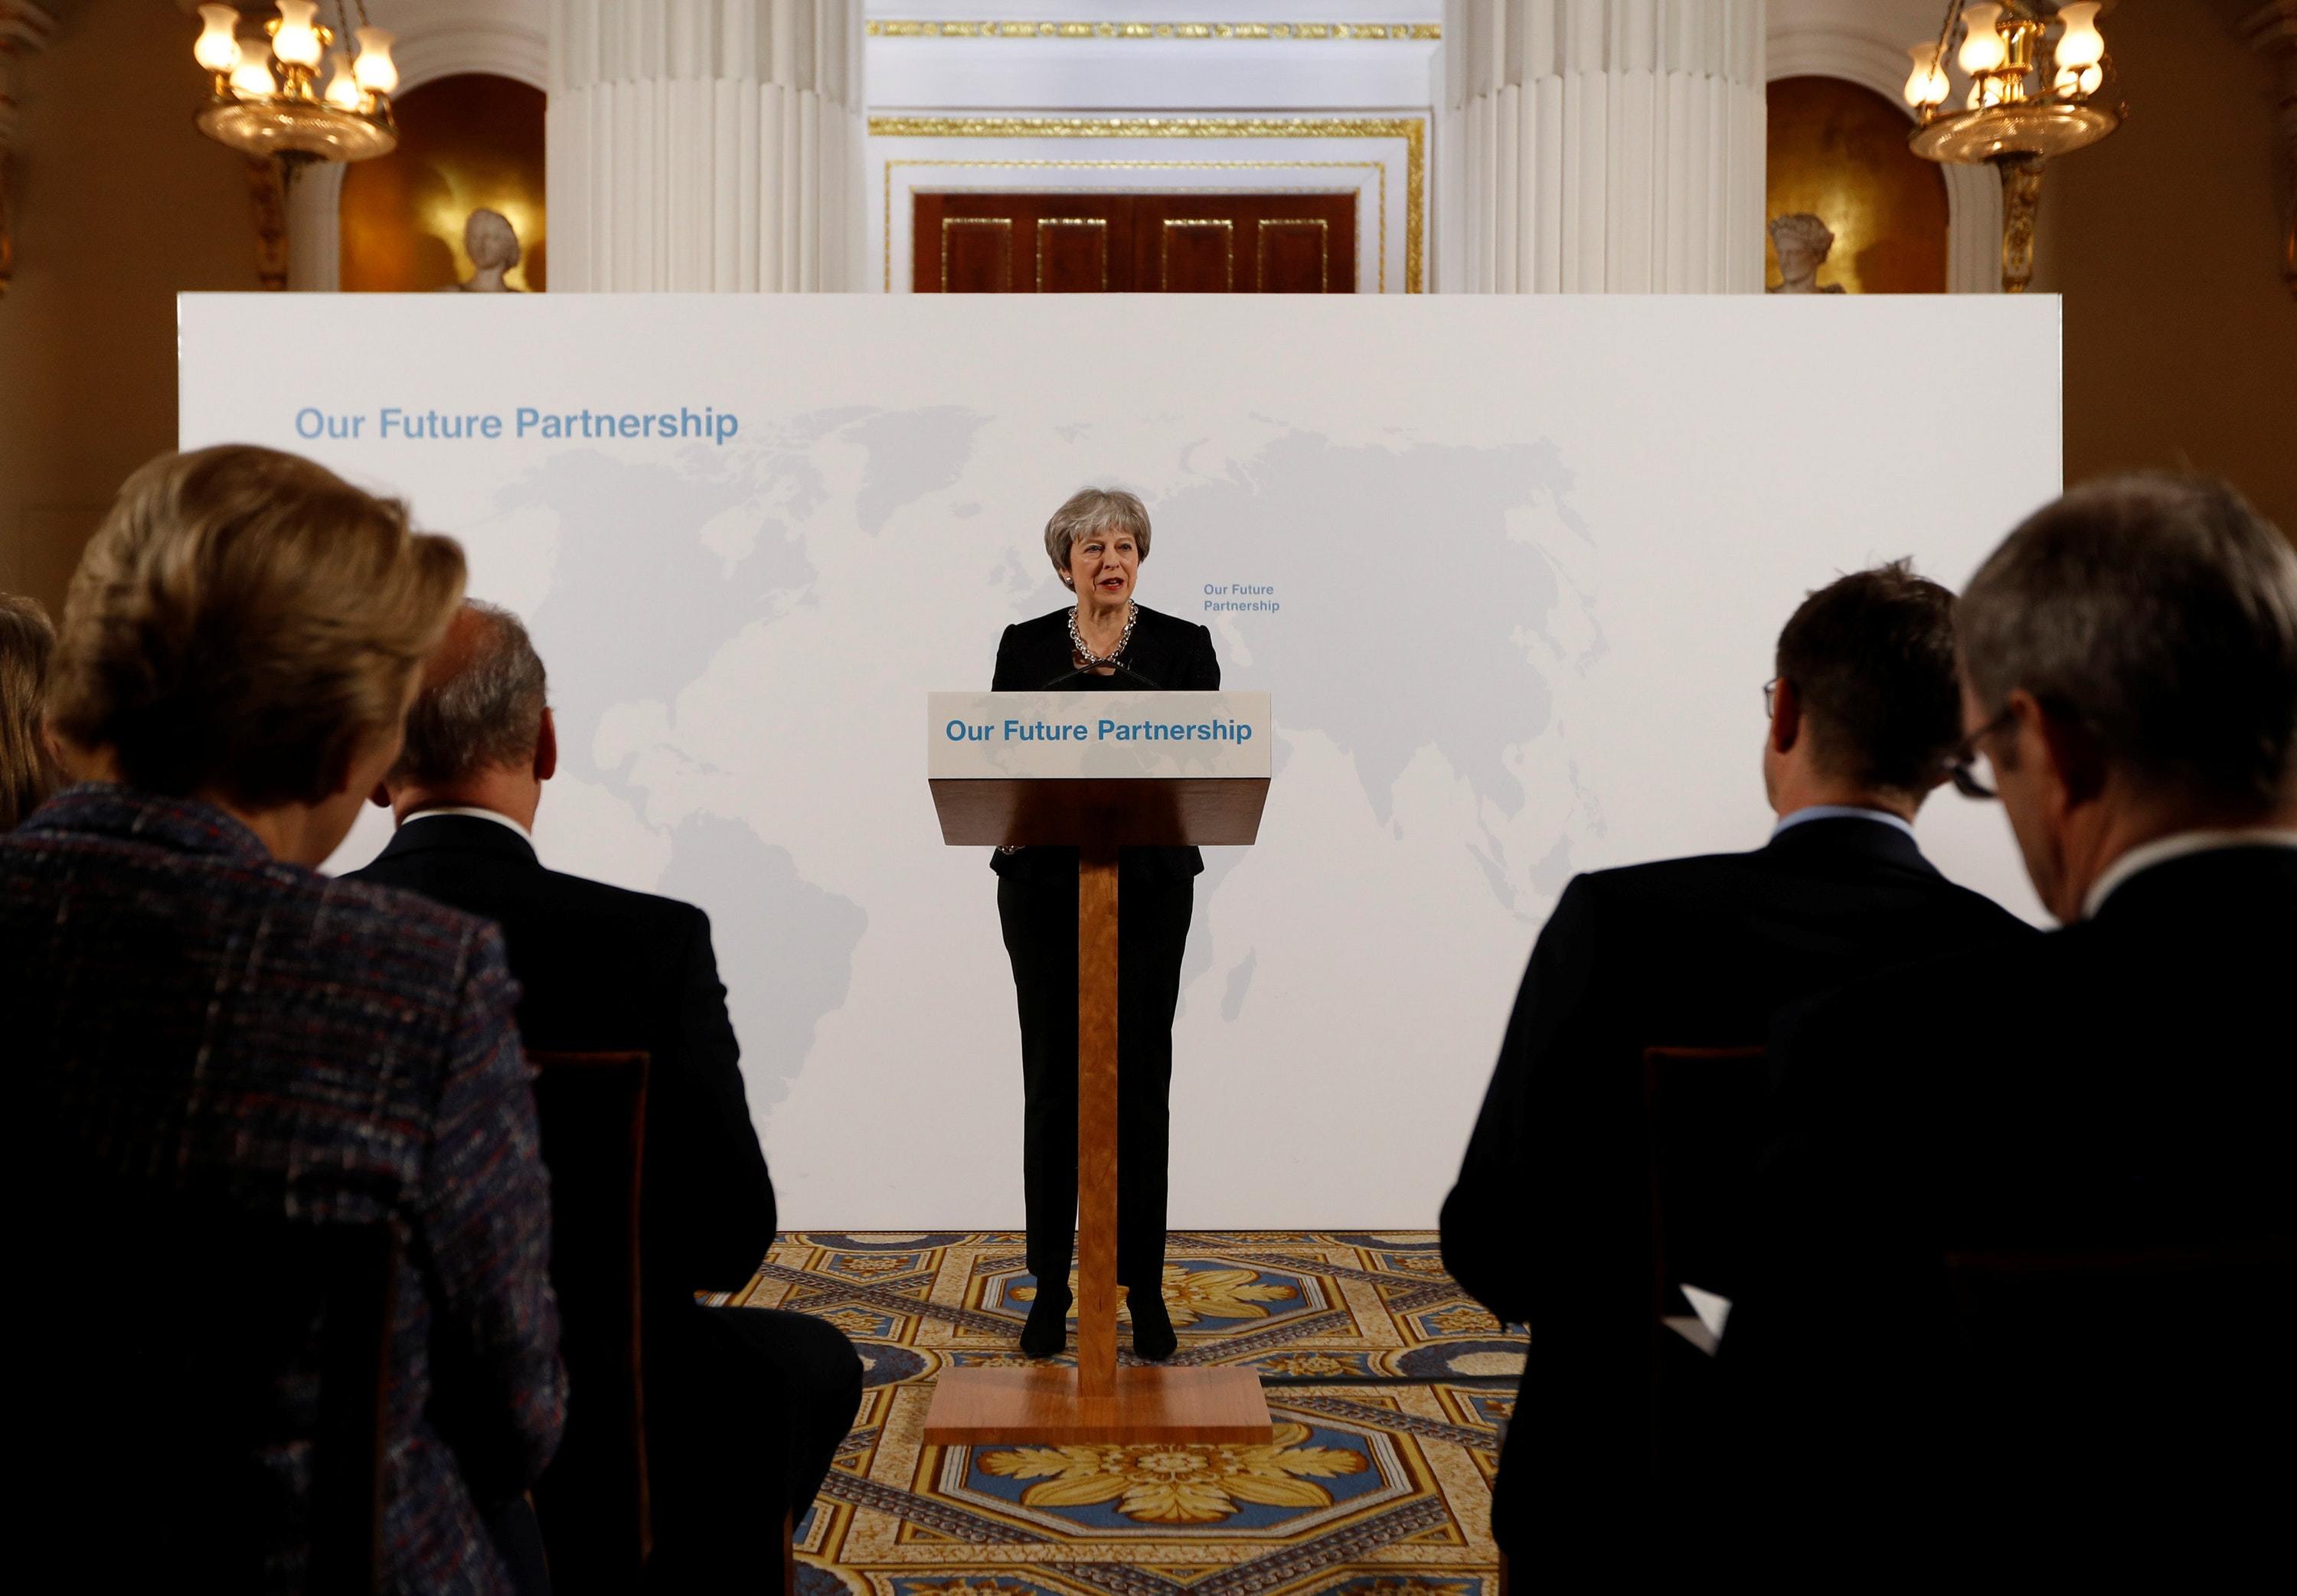 Prime Minister Theresa May delivers a speech at the Mansion House in London on the UK’s economic partnership with the EU after Brexit. (PA)